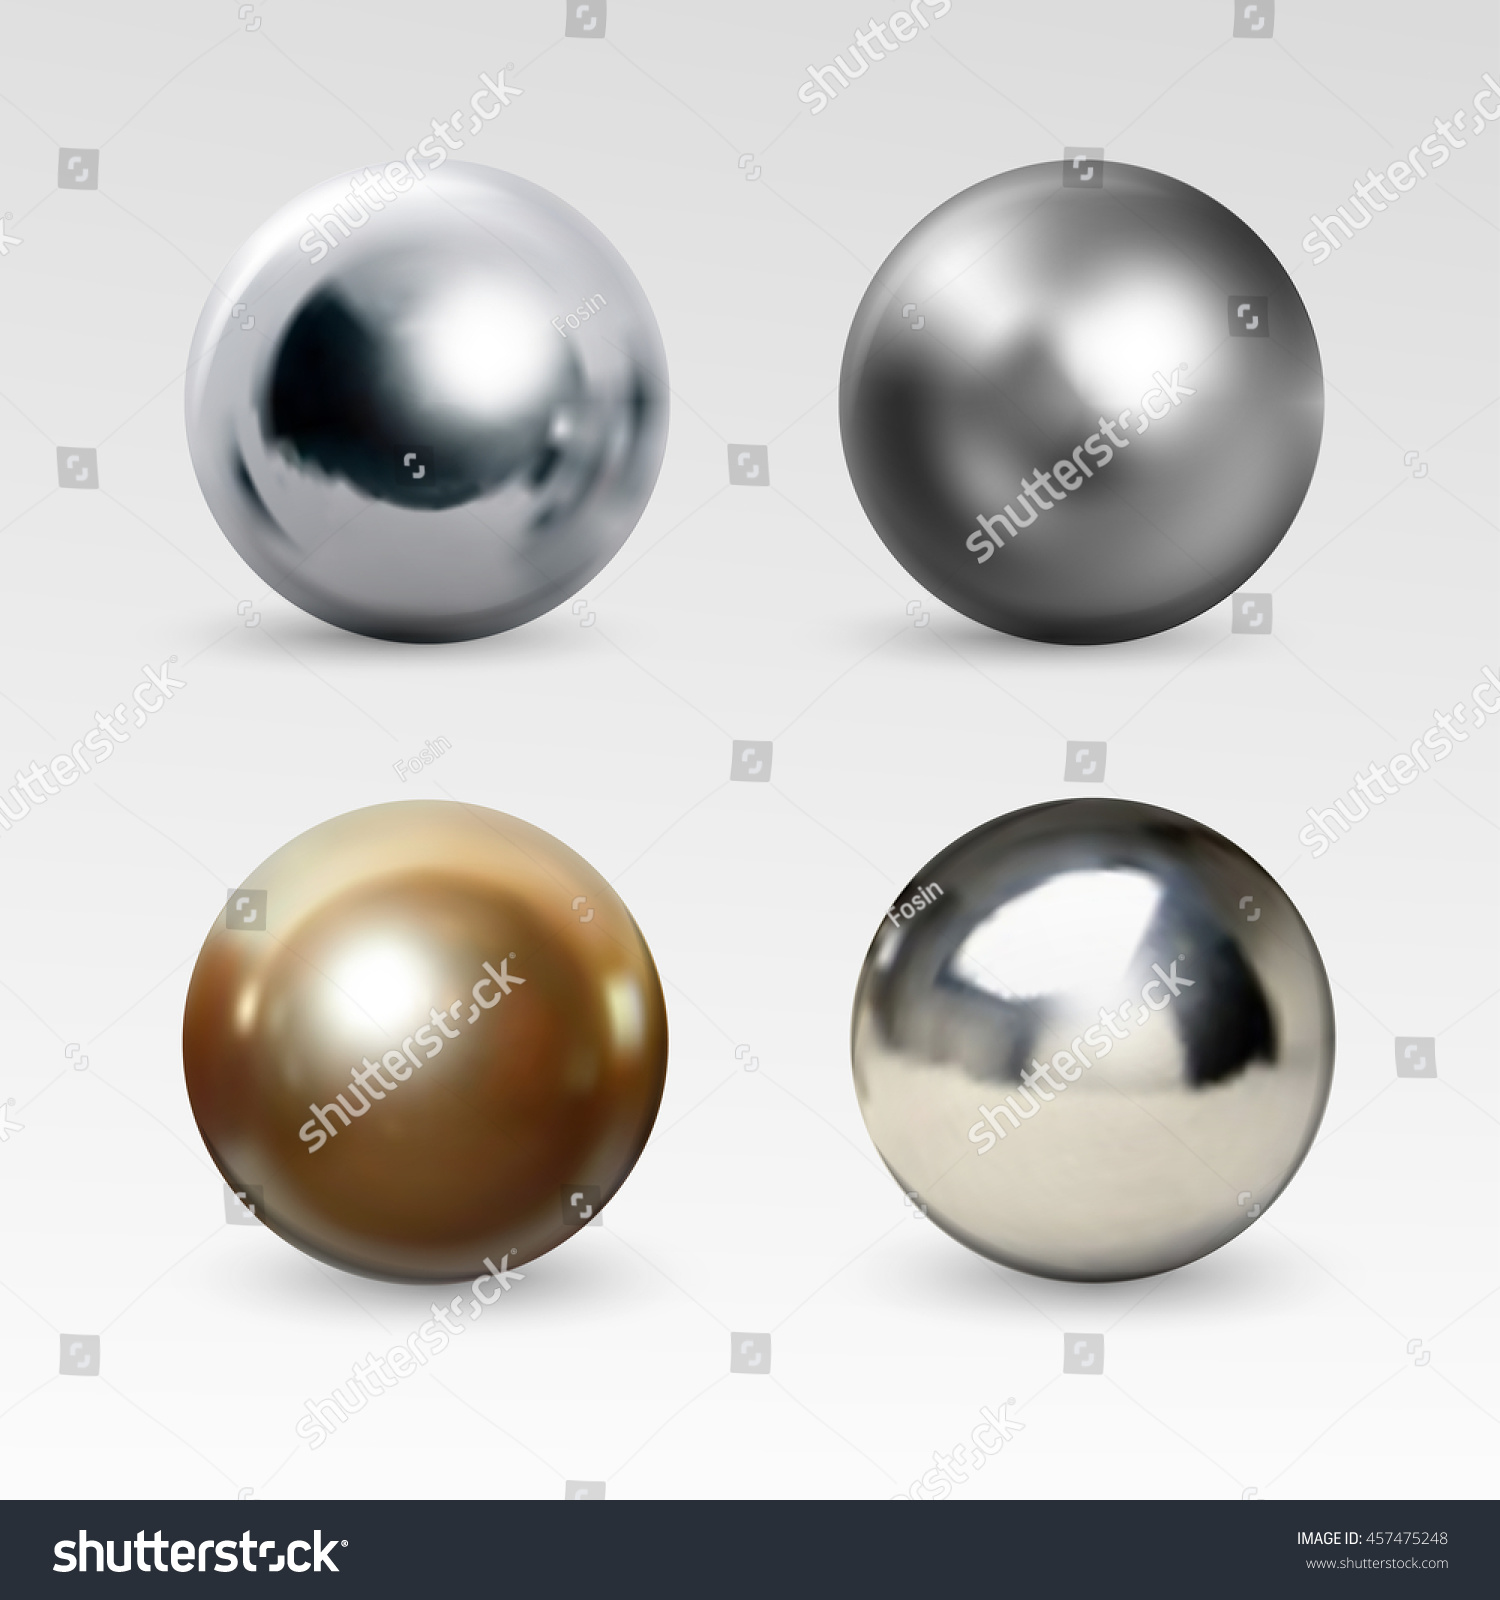 Chrome Ball Realistic Isolated On White Stock Vector (2018 ...